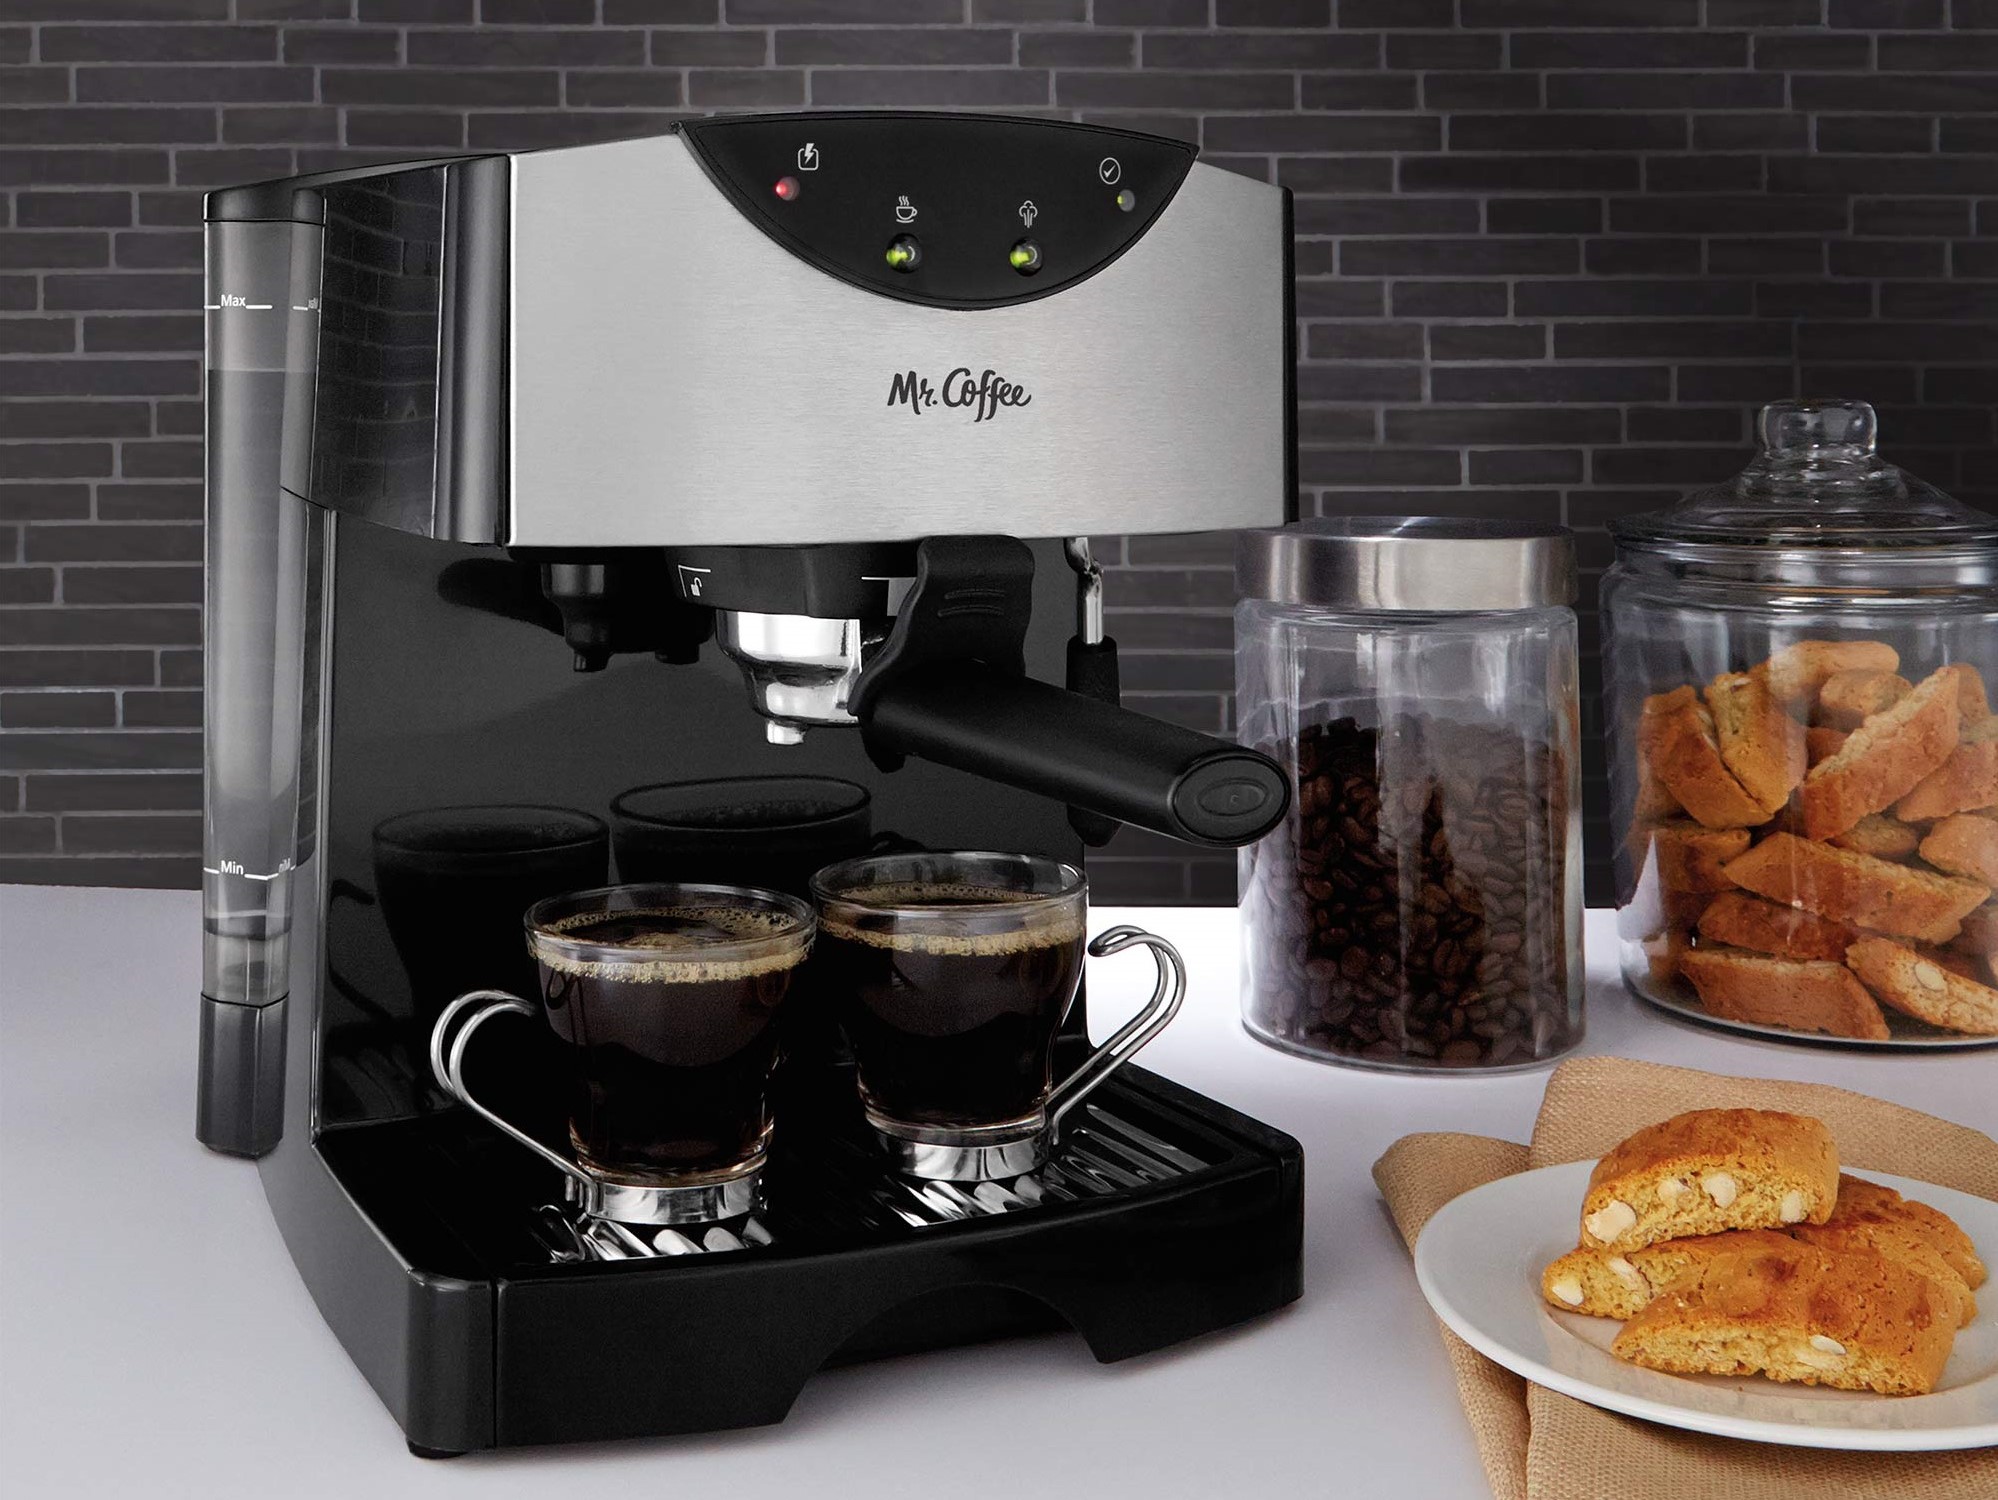 Keurig coffee makers are massively discounted for Halloween